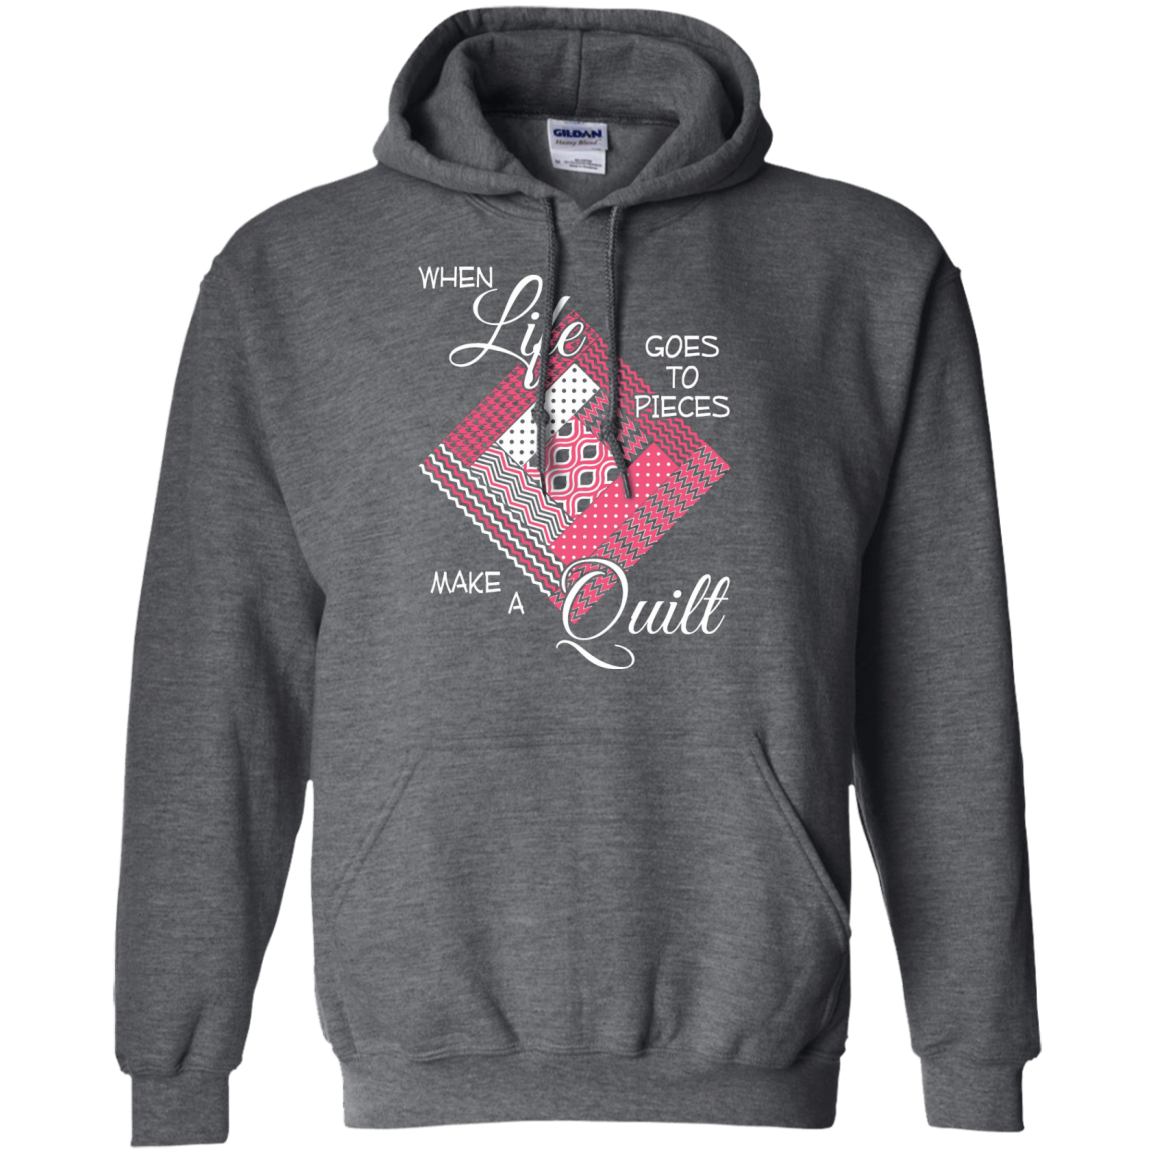 Make a Quilt (pink) Pullover Hoodies - Crafter4Life - 4